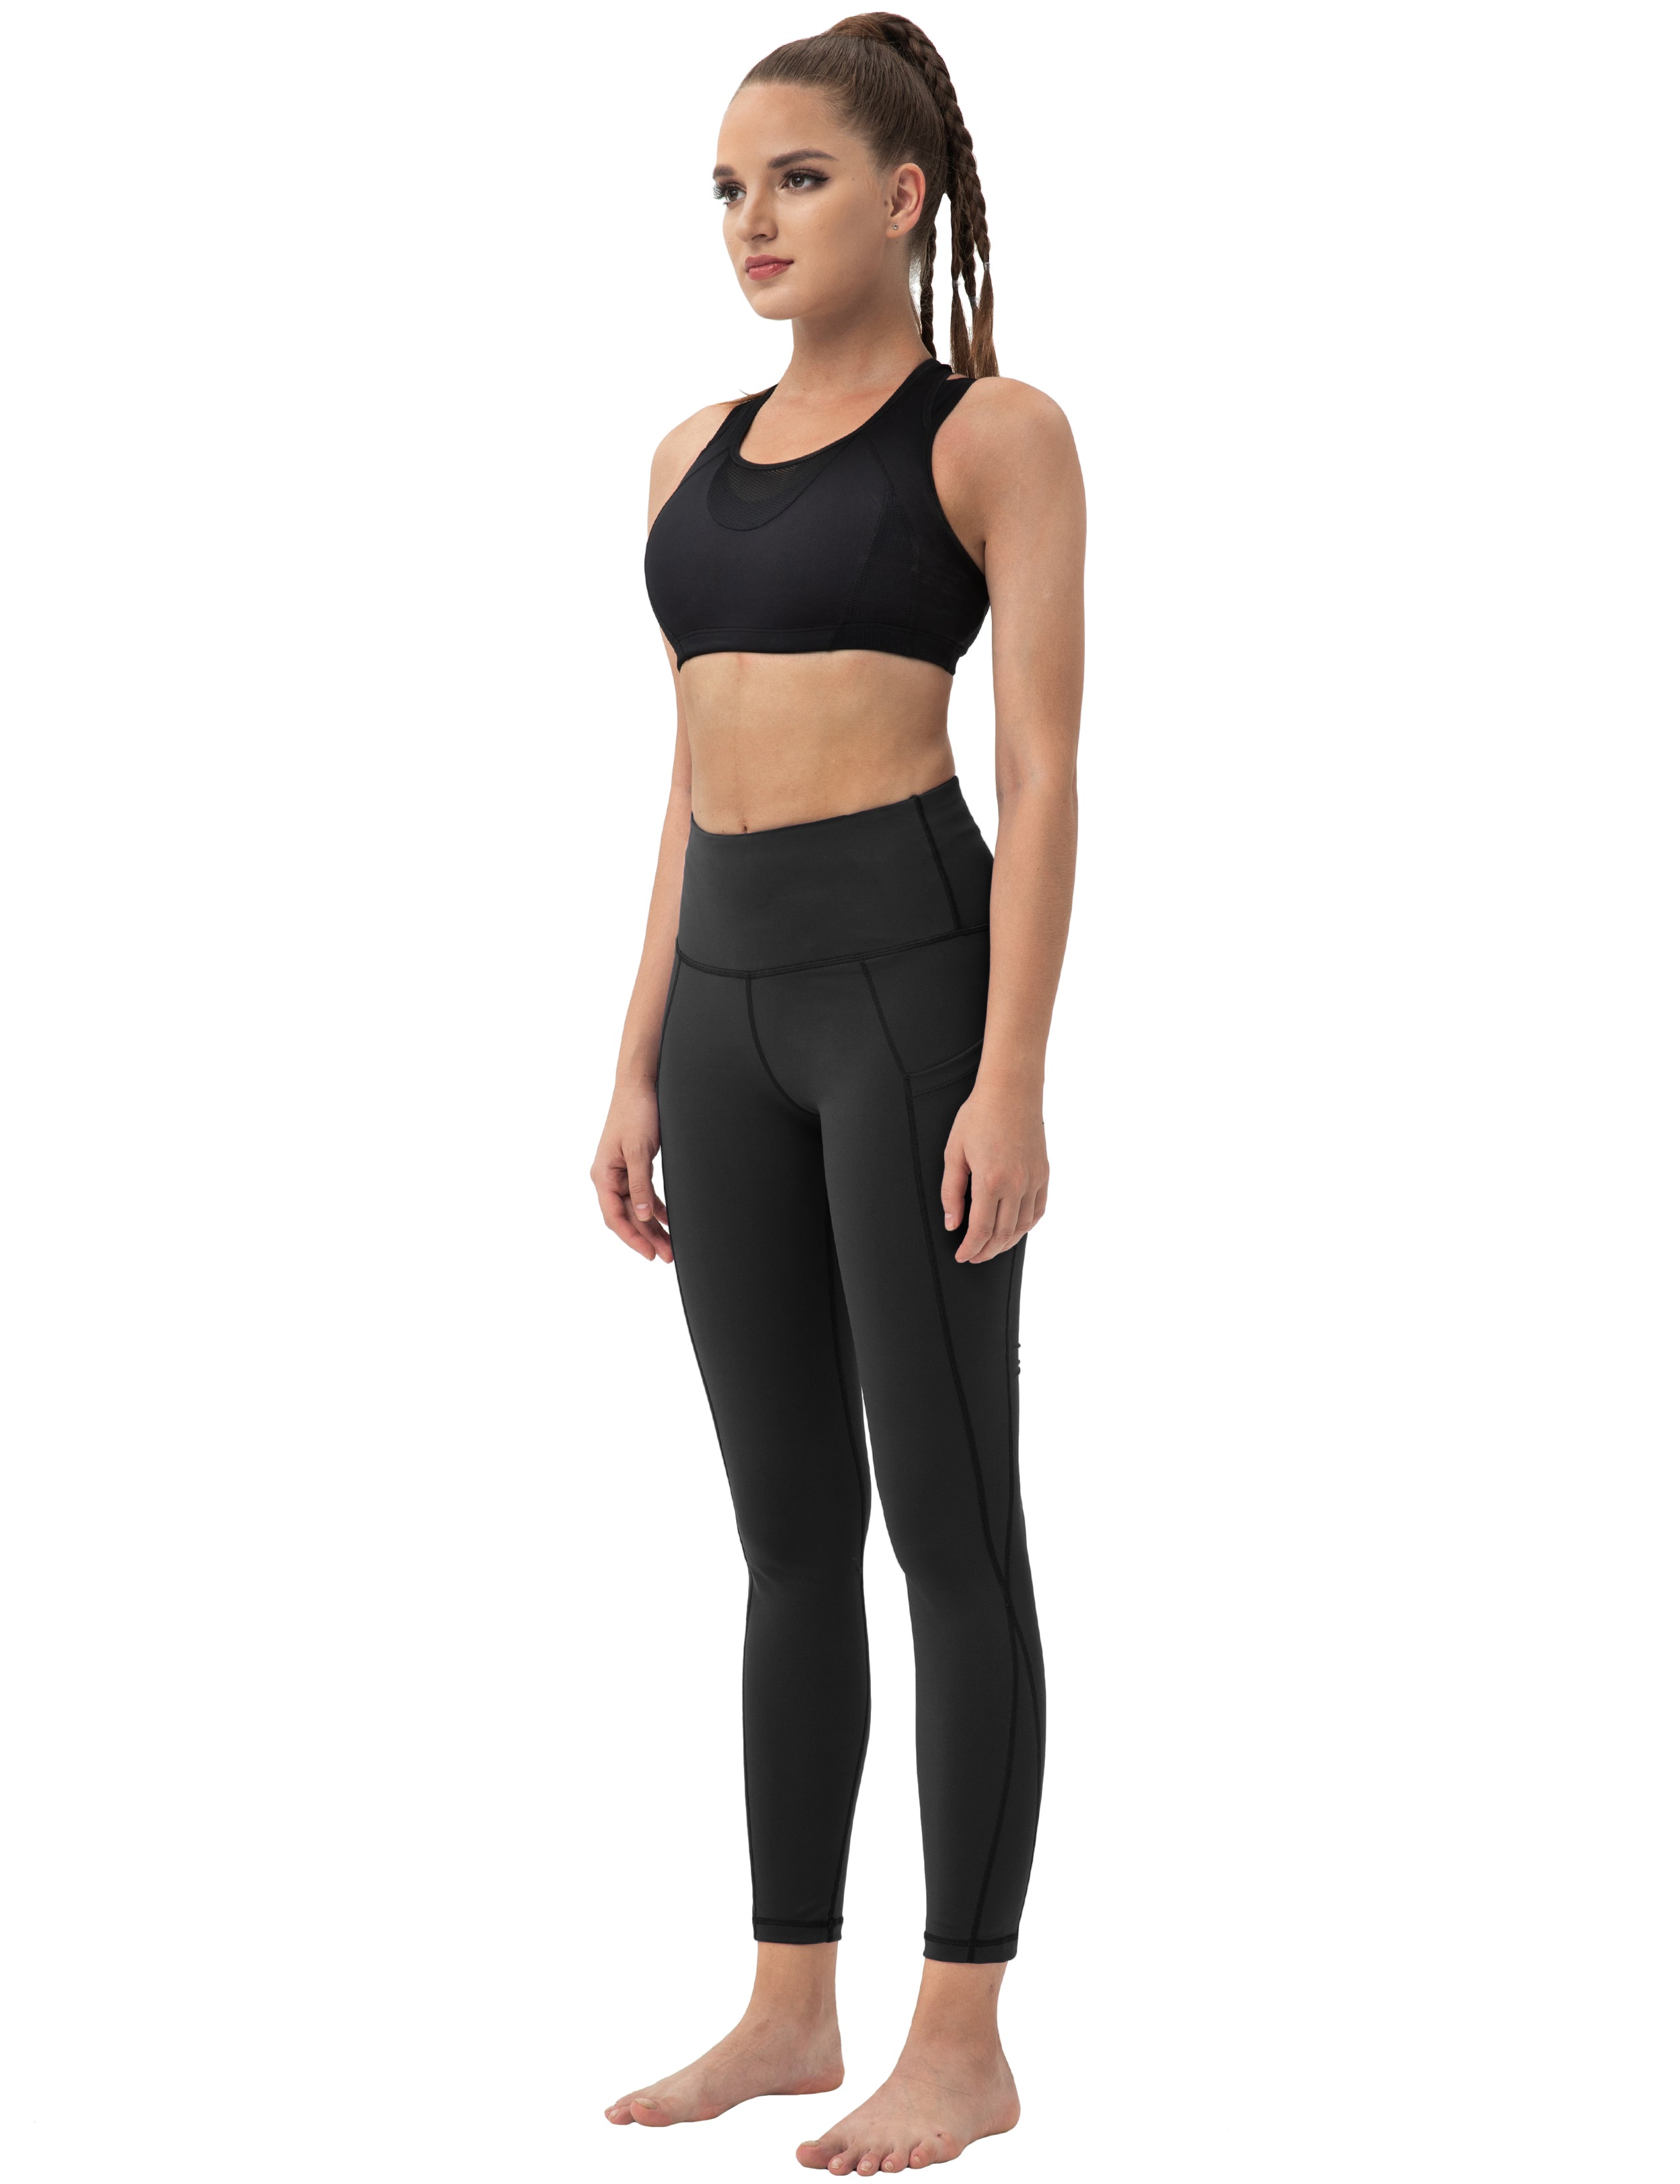 High Waist Side Pockets Yoga Pants black 75% Nylon, 25% Spandex Fabric doesn't attract lint easily 4-way stretch No see-through Moisture-wicking Tummy control Inner pocket